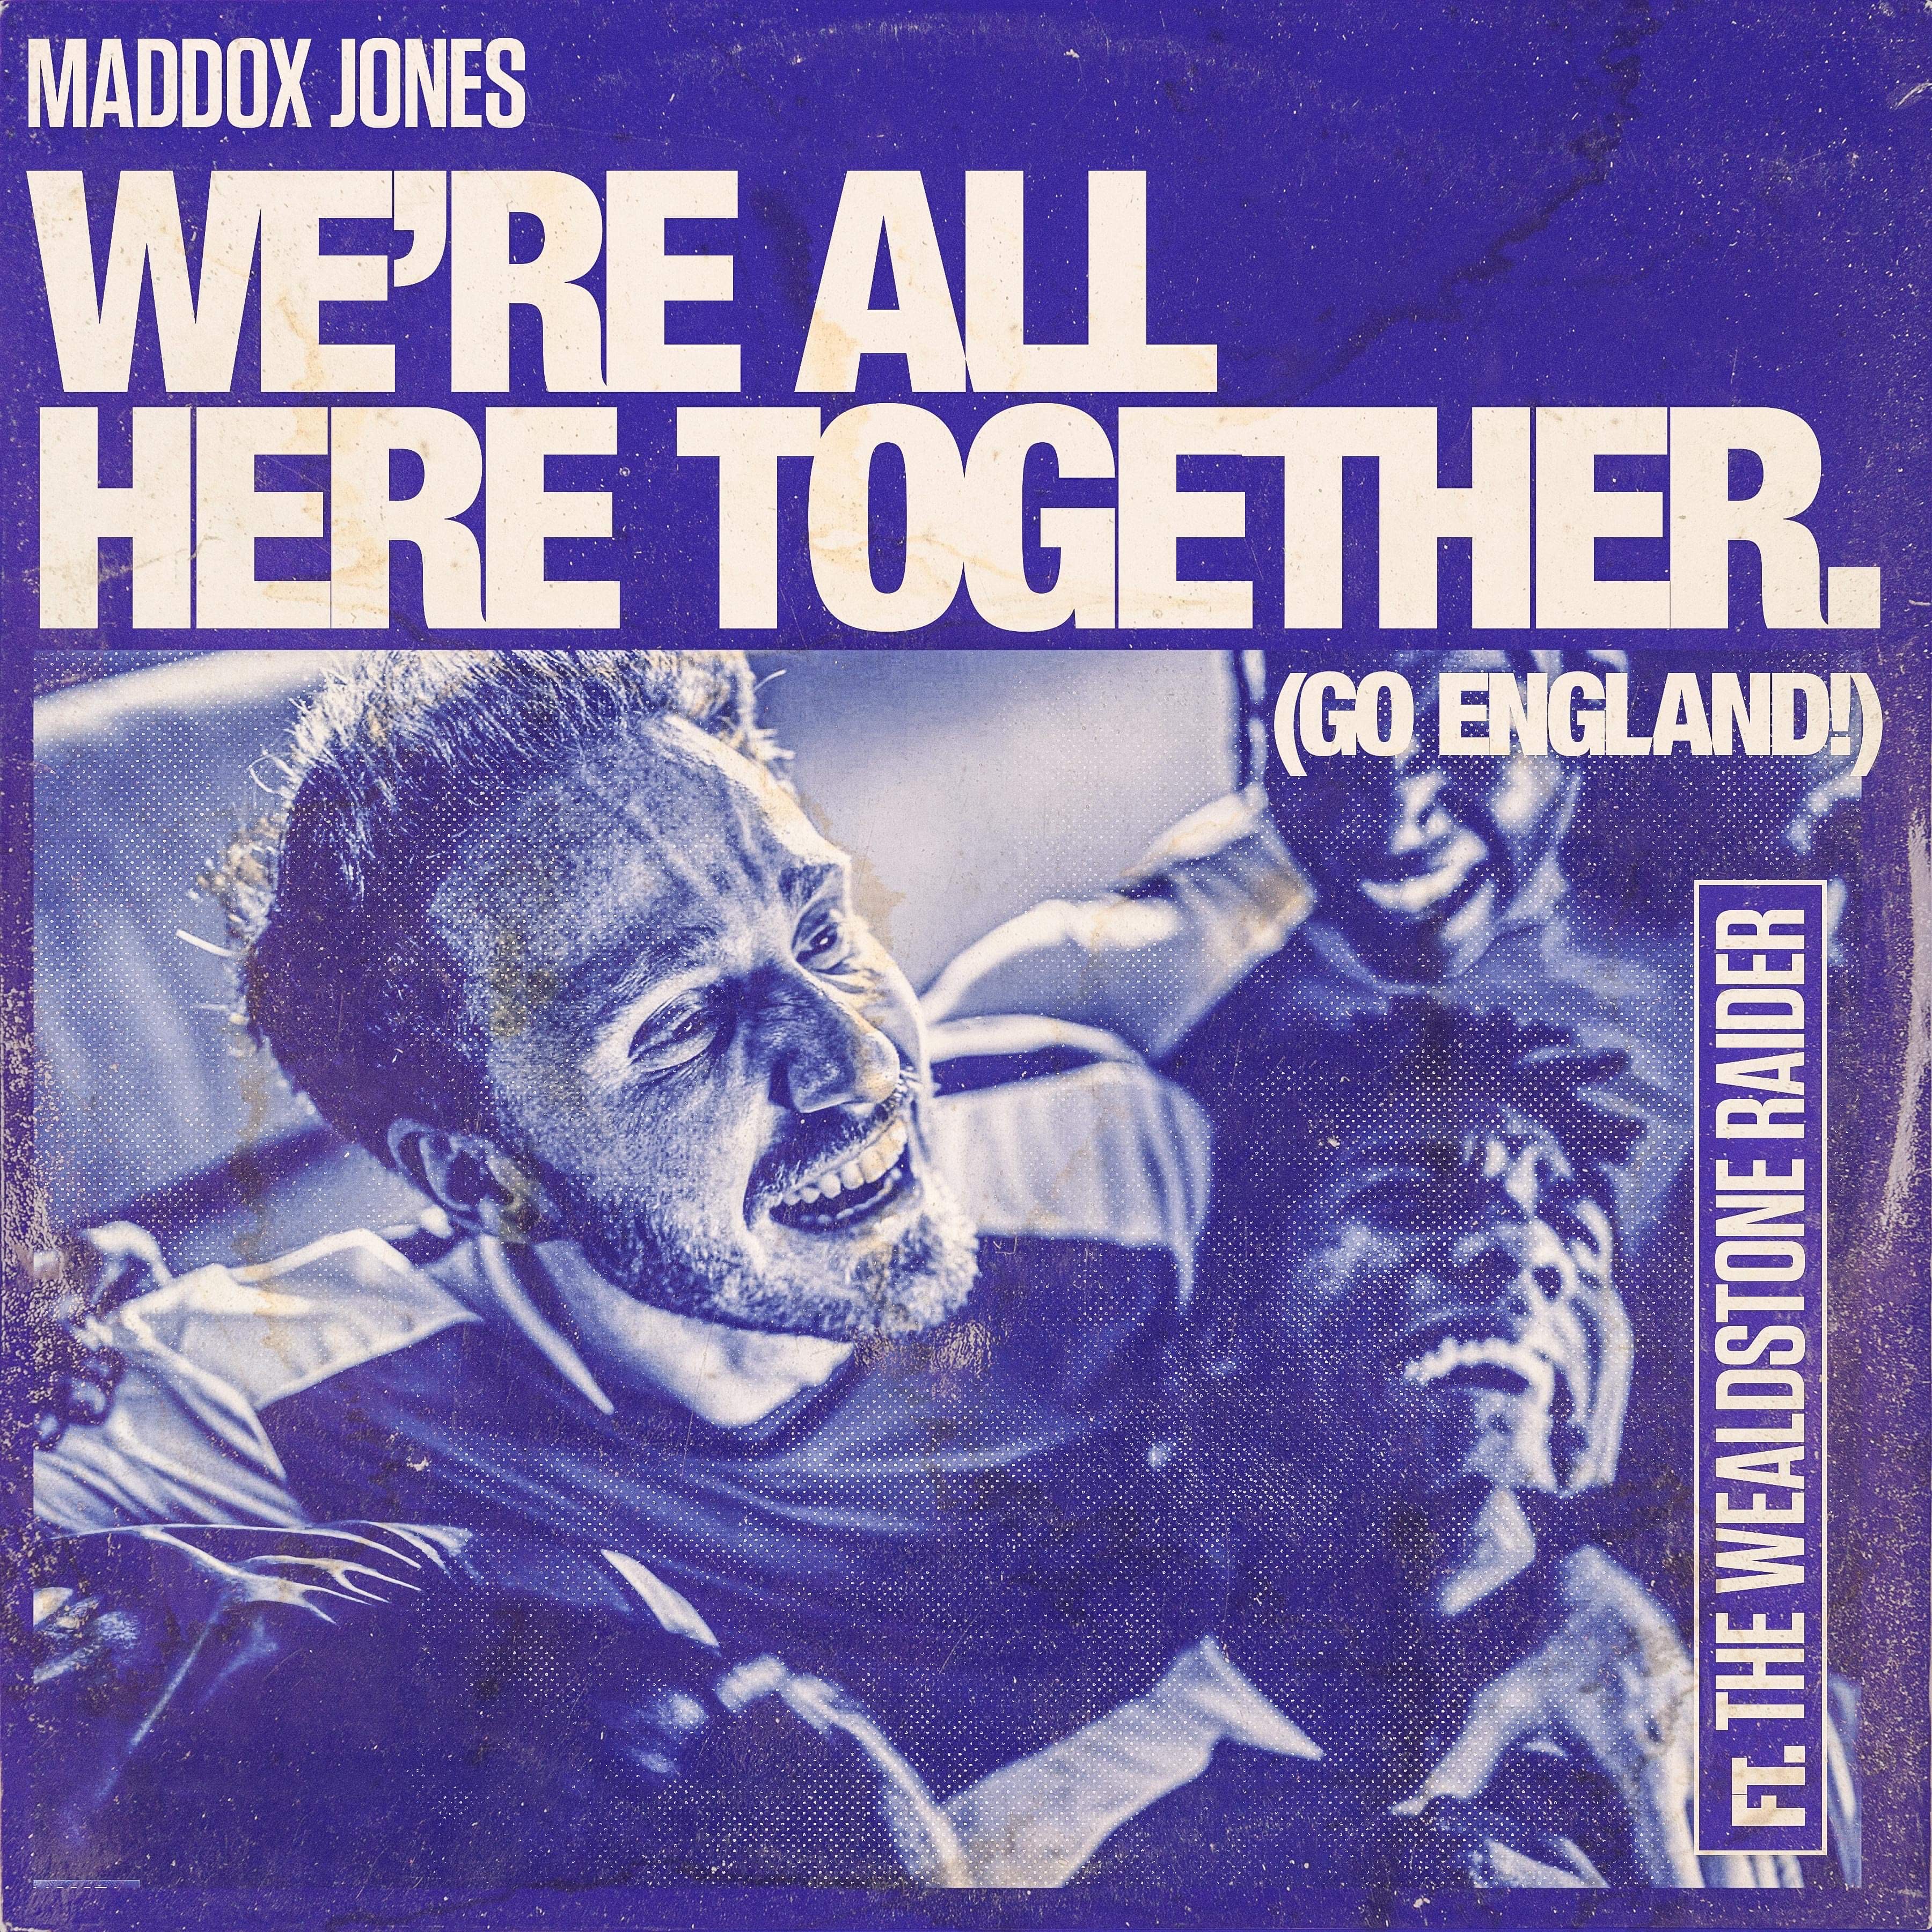 Maddox Jones - We're All Here Together (Go England!) - Cover Art